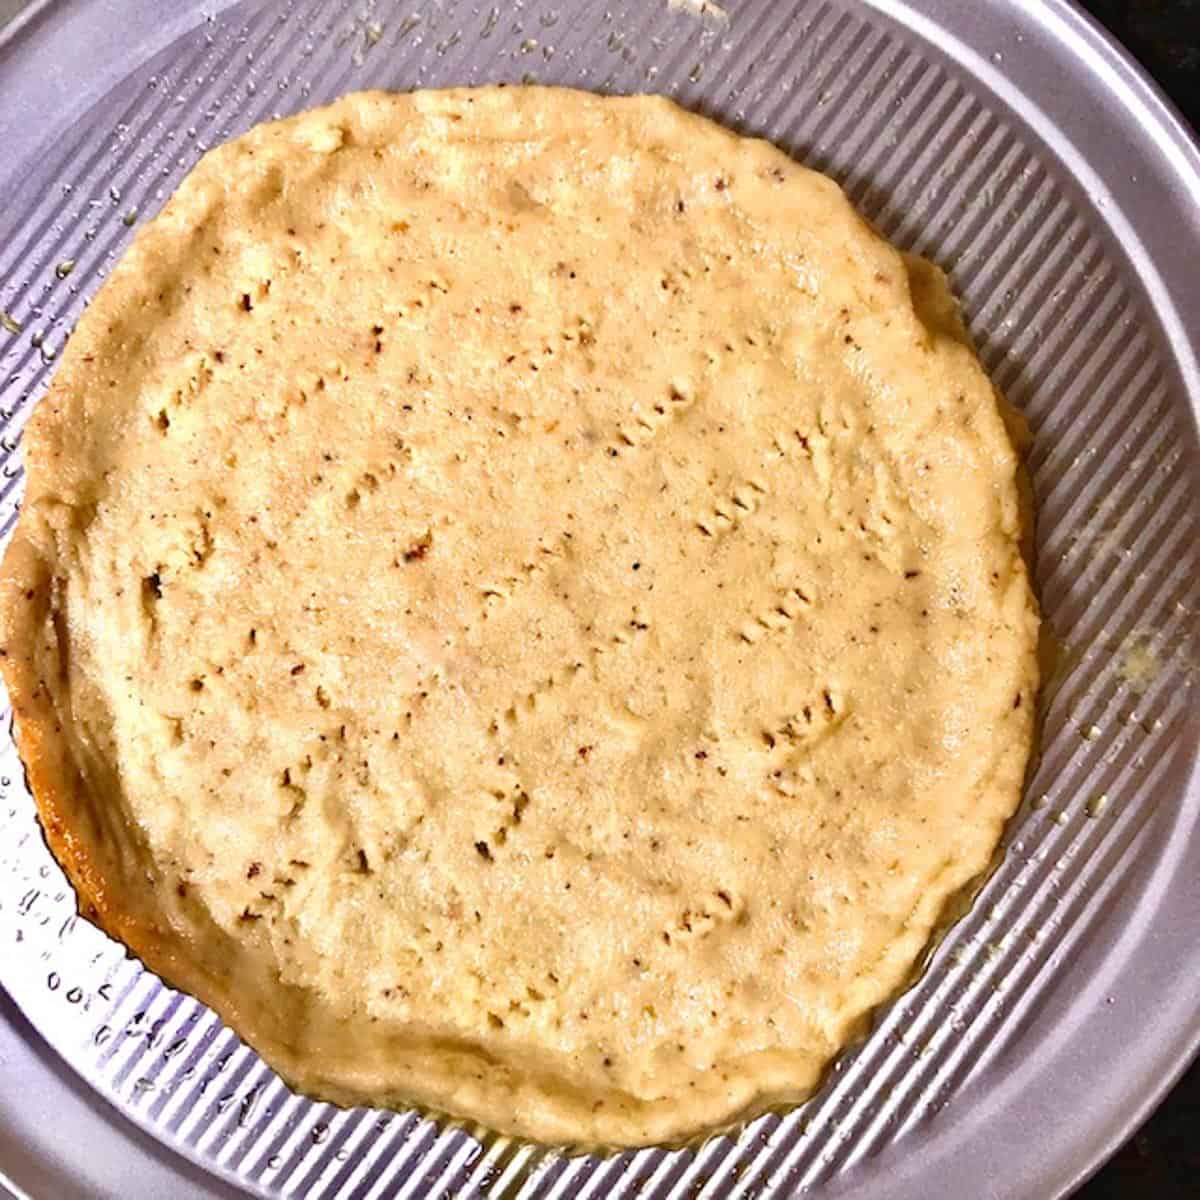 Keto fathead dough pizza crust rolled out on a pizza pan and fork poked ready to bake.